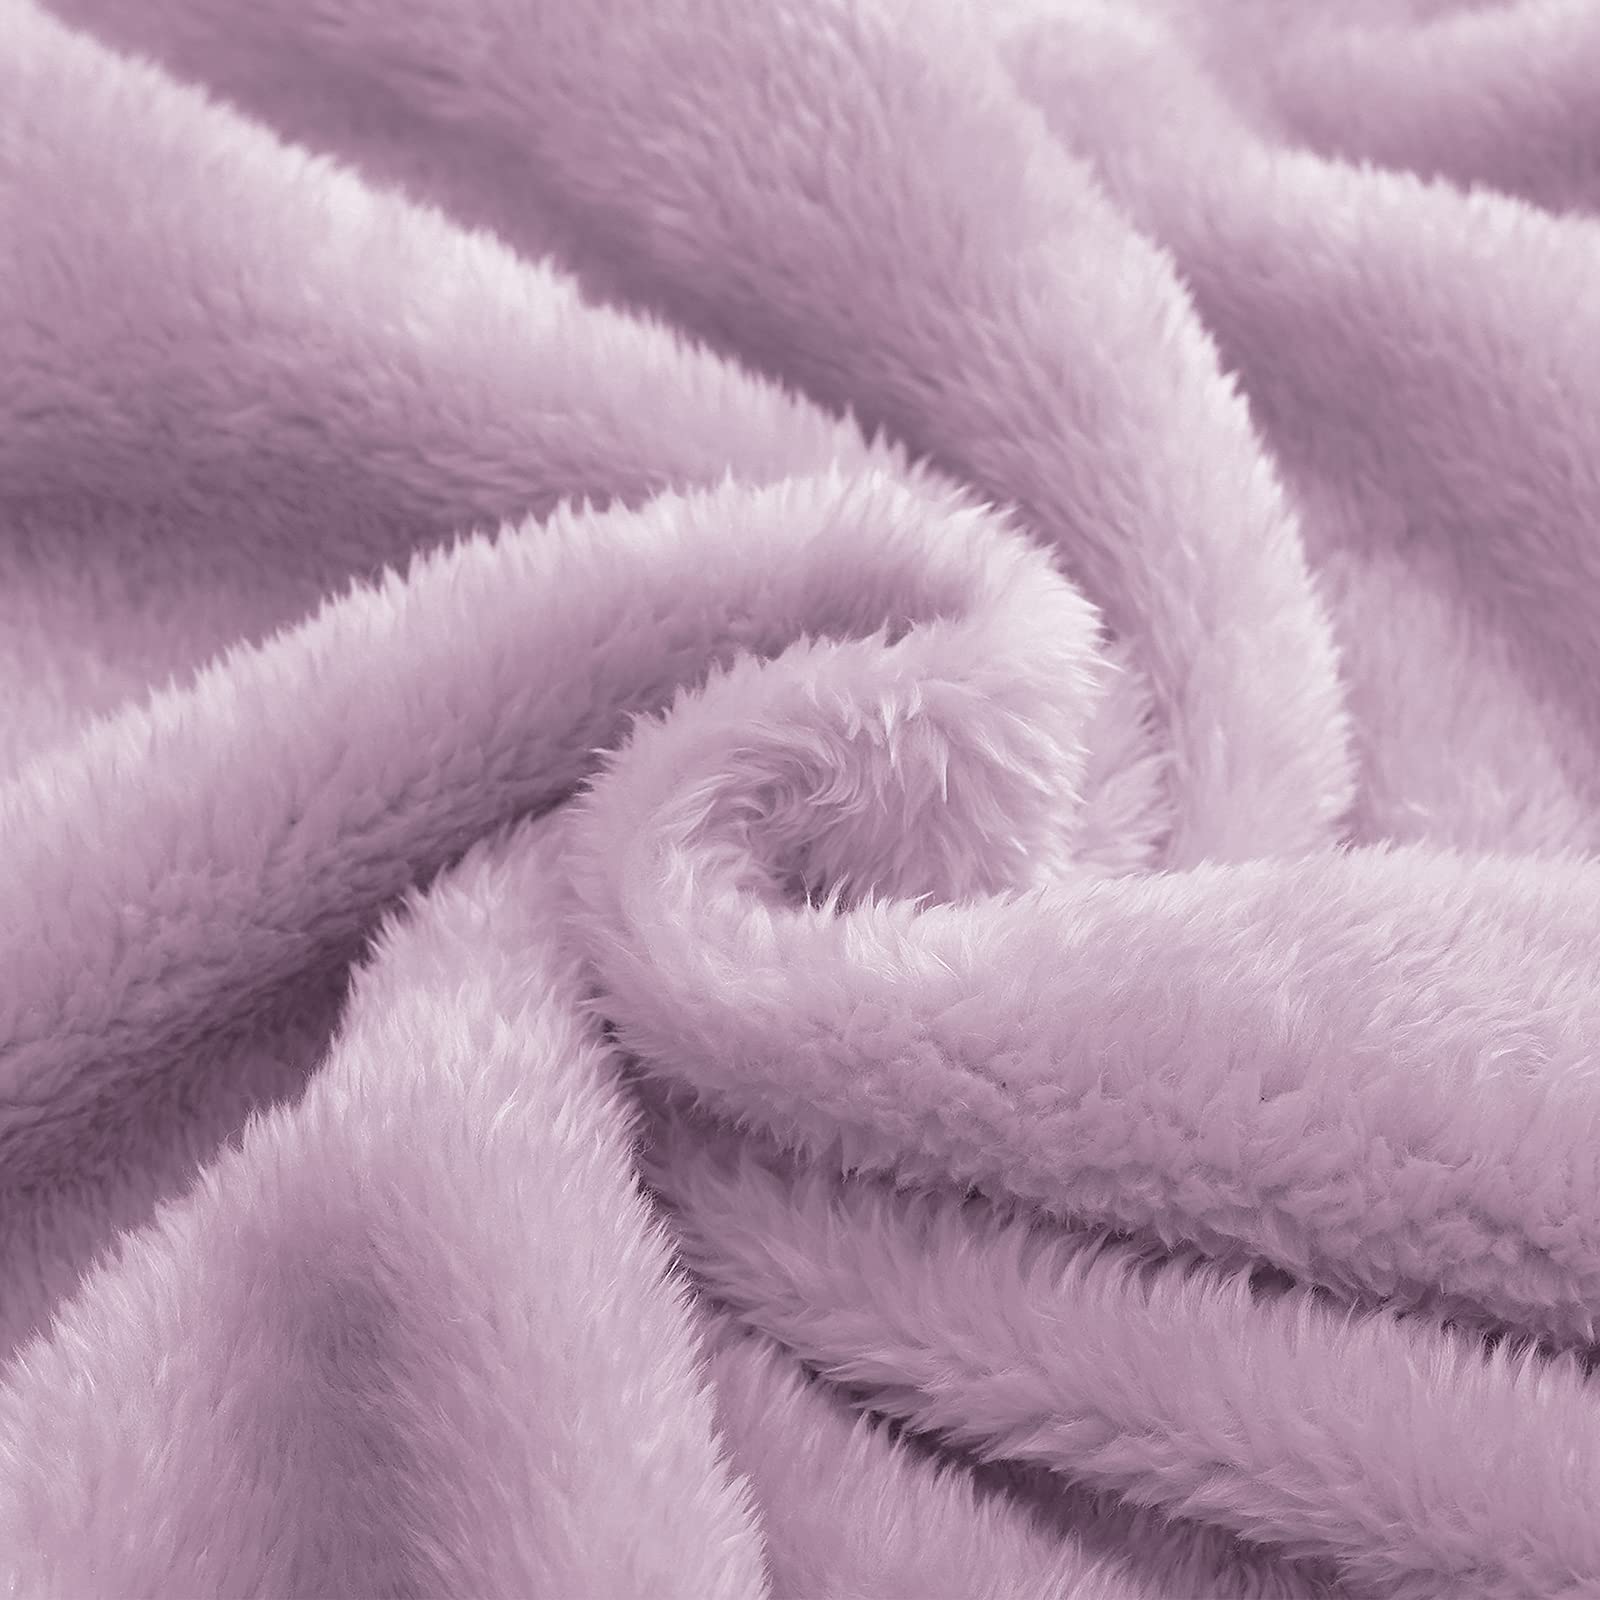 Exclusivo Mezcla Plush Fuzzy Fleece Throw Blanket Kids Size, Super Soft, Fluffy and Warm Blankets for Couch, Bed, All Season Use (40x50 inches, Light Purple)